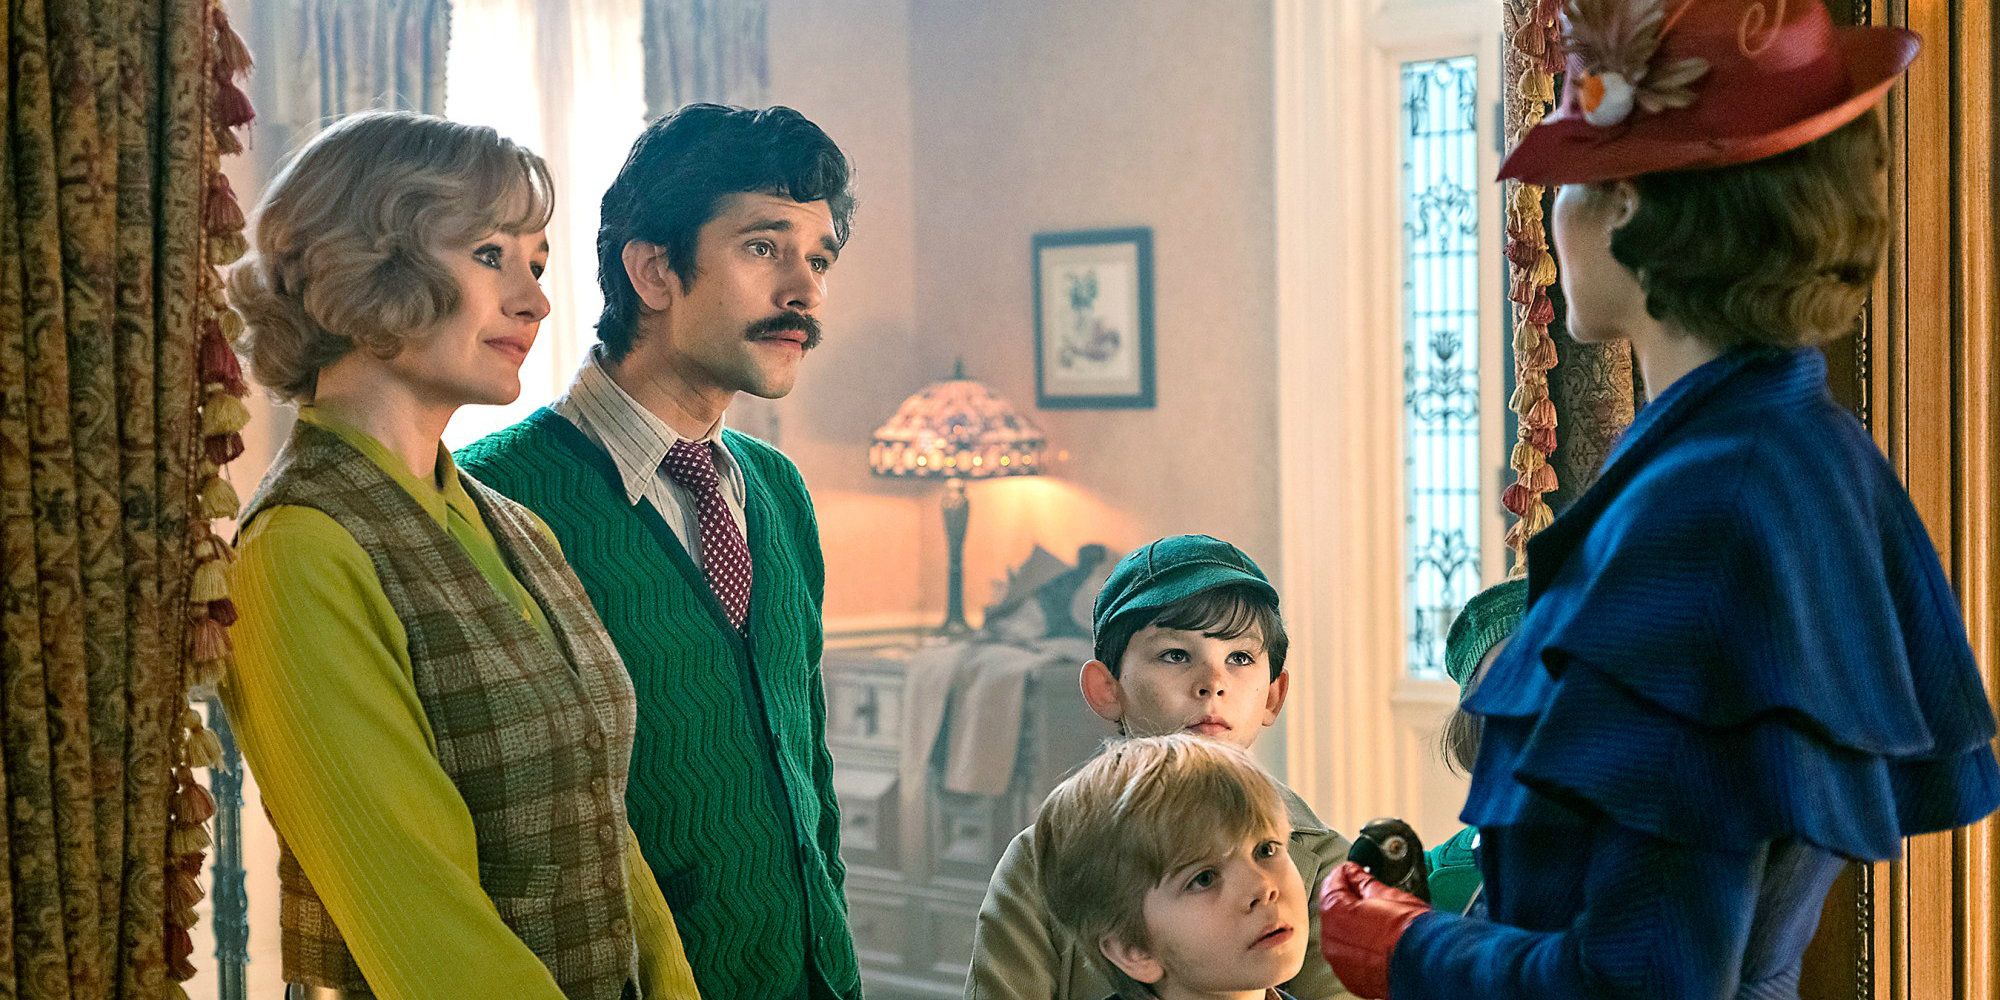 The Banks family meeting Mary Poppins for the first time in Mary Poppins Returns